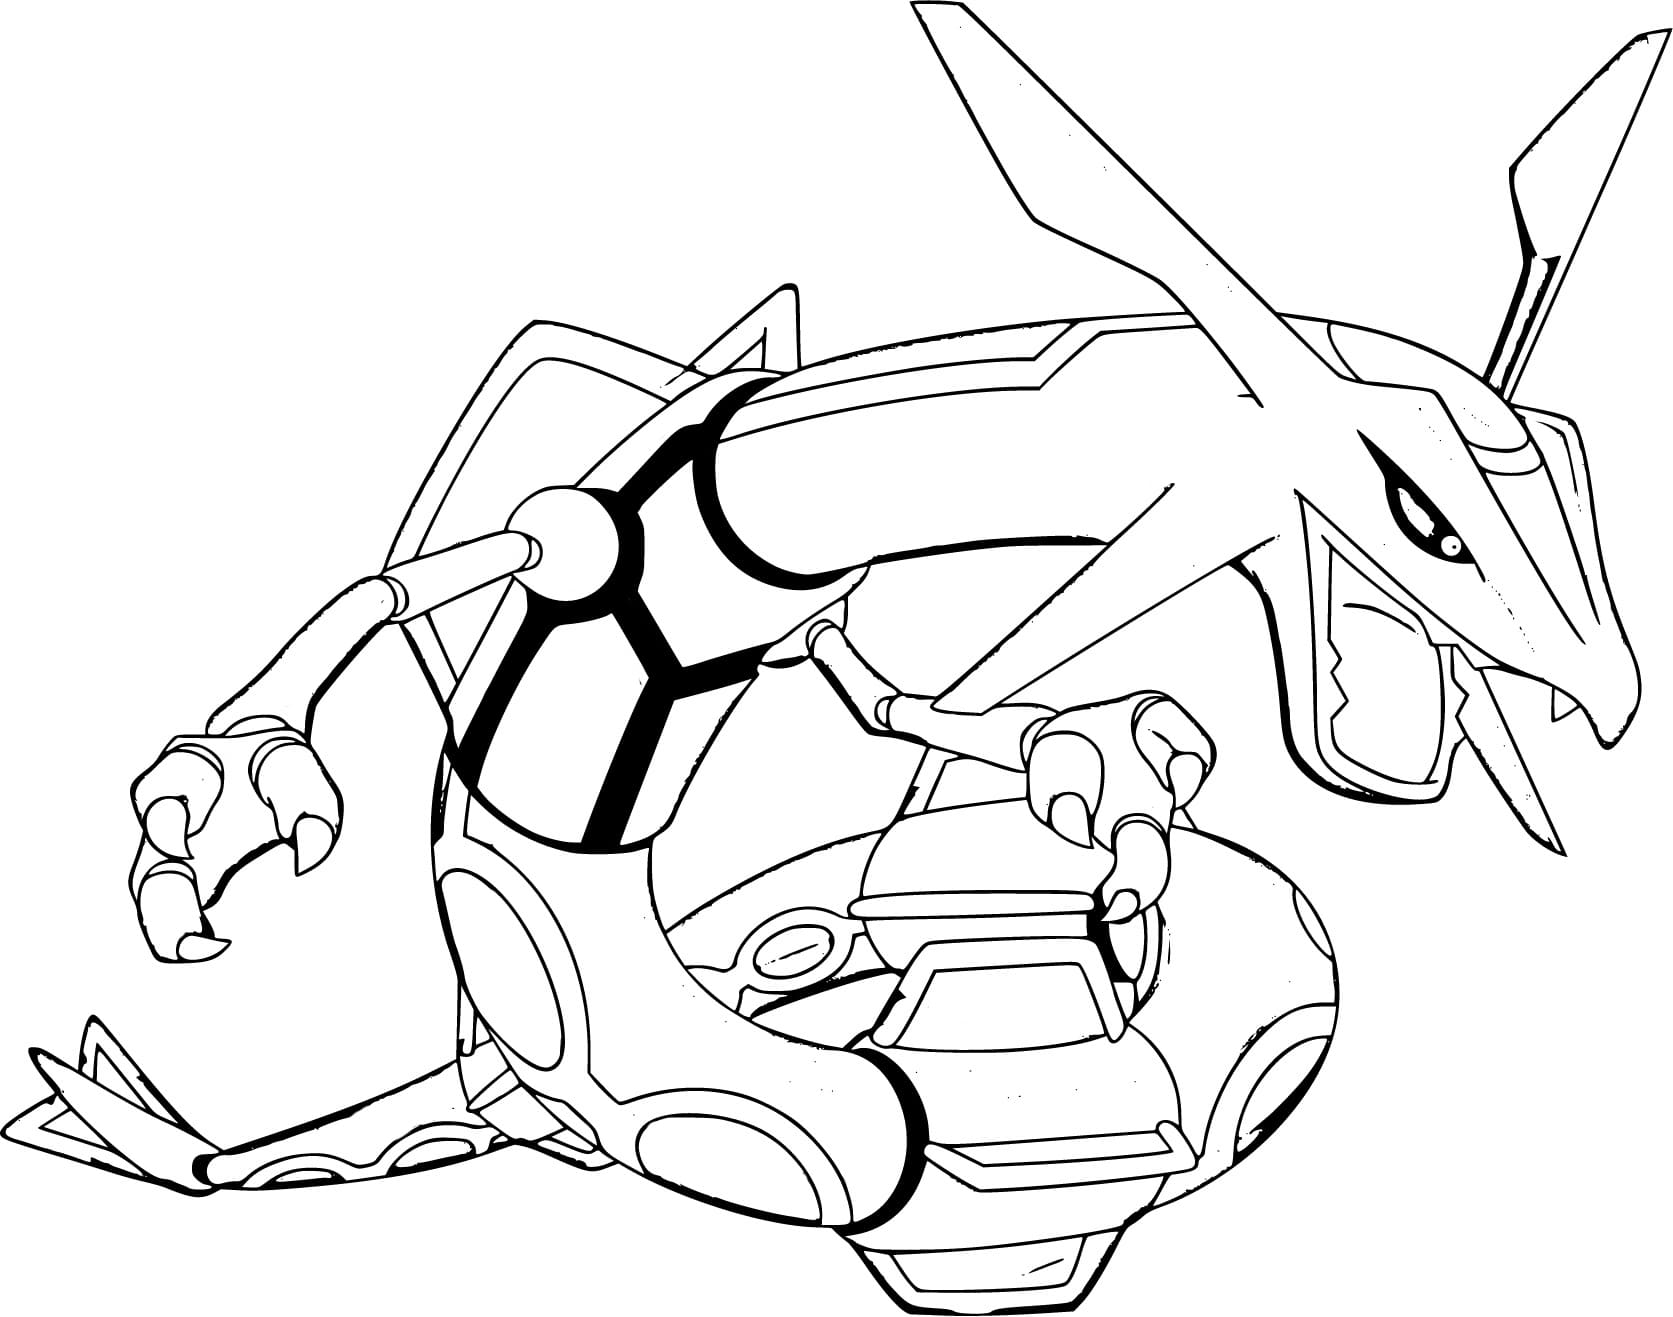 Pokémon Rayquaza 7 coloring page